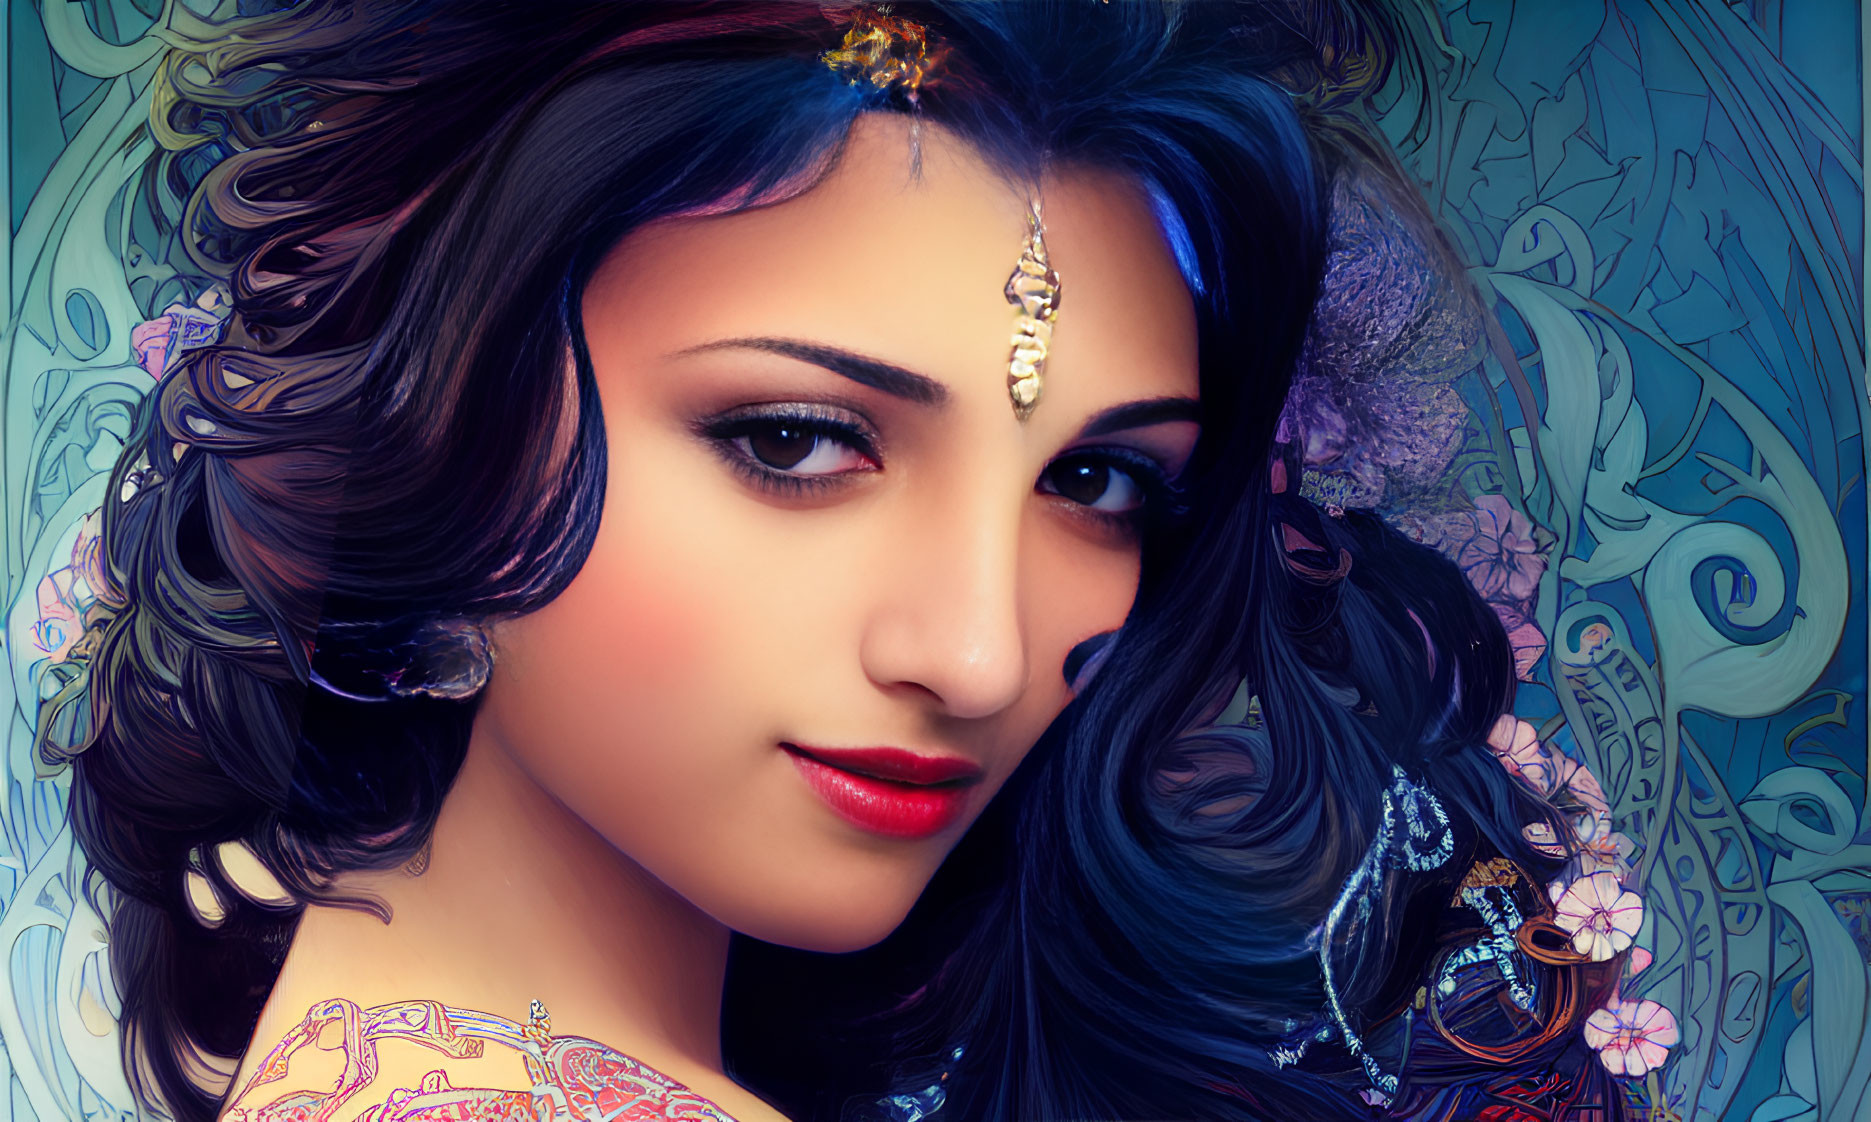 Vibrant digital artwork of a serene woman with ornate jewelry and floral patterns